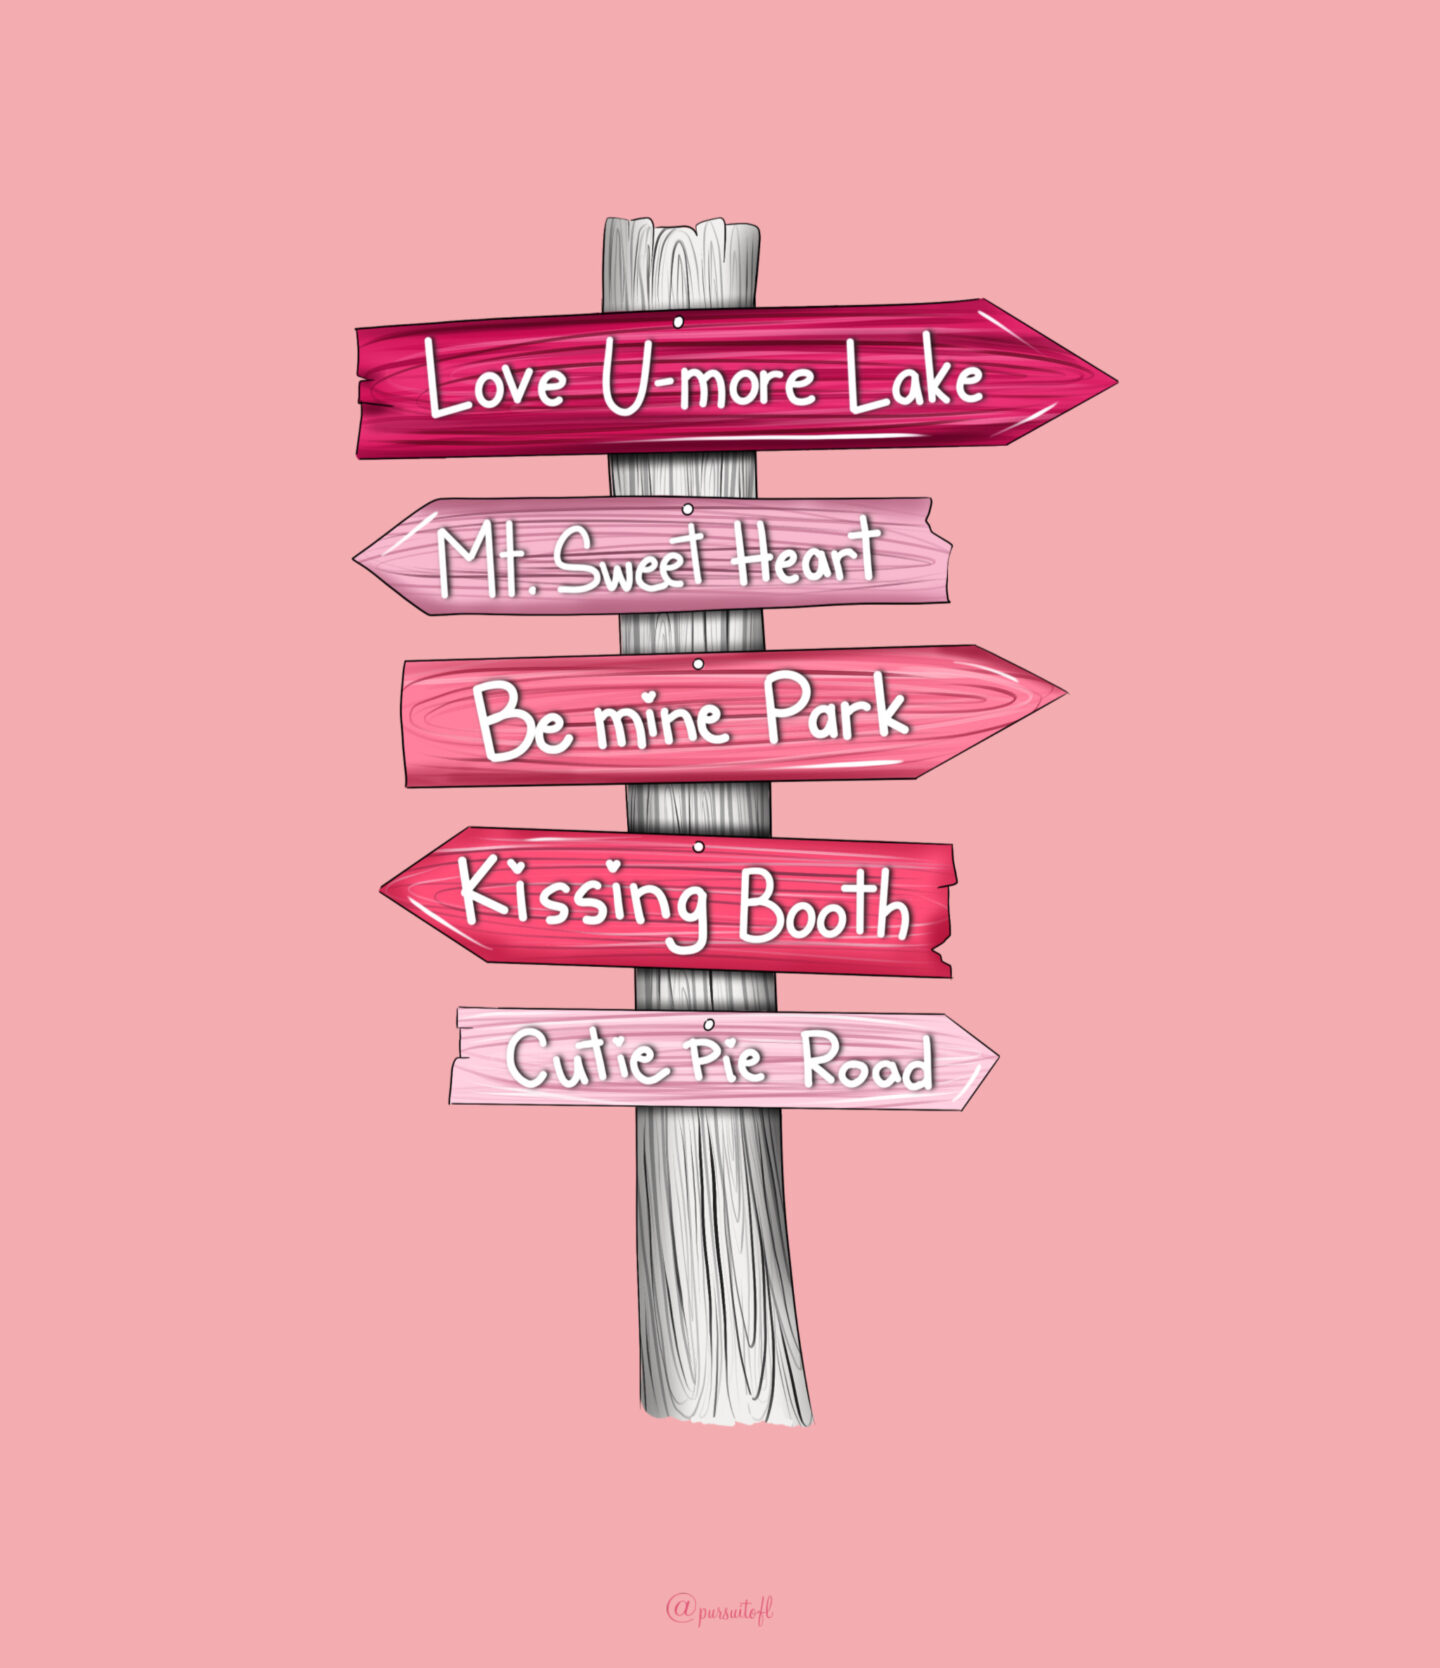 Pink Tablet Wallpaper with Post with Valentine's Day Signs with text Love U-more Lake, Mt. Sweet Heart, Be mine Park, Kissing Booth, and Cutie Pie Road; Valentines' Day Wallpaper